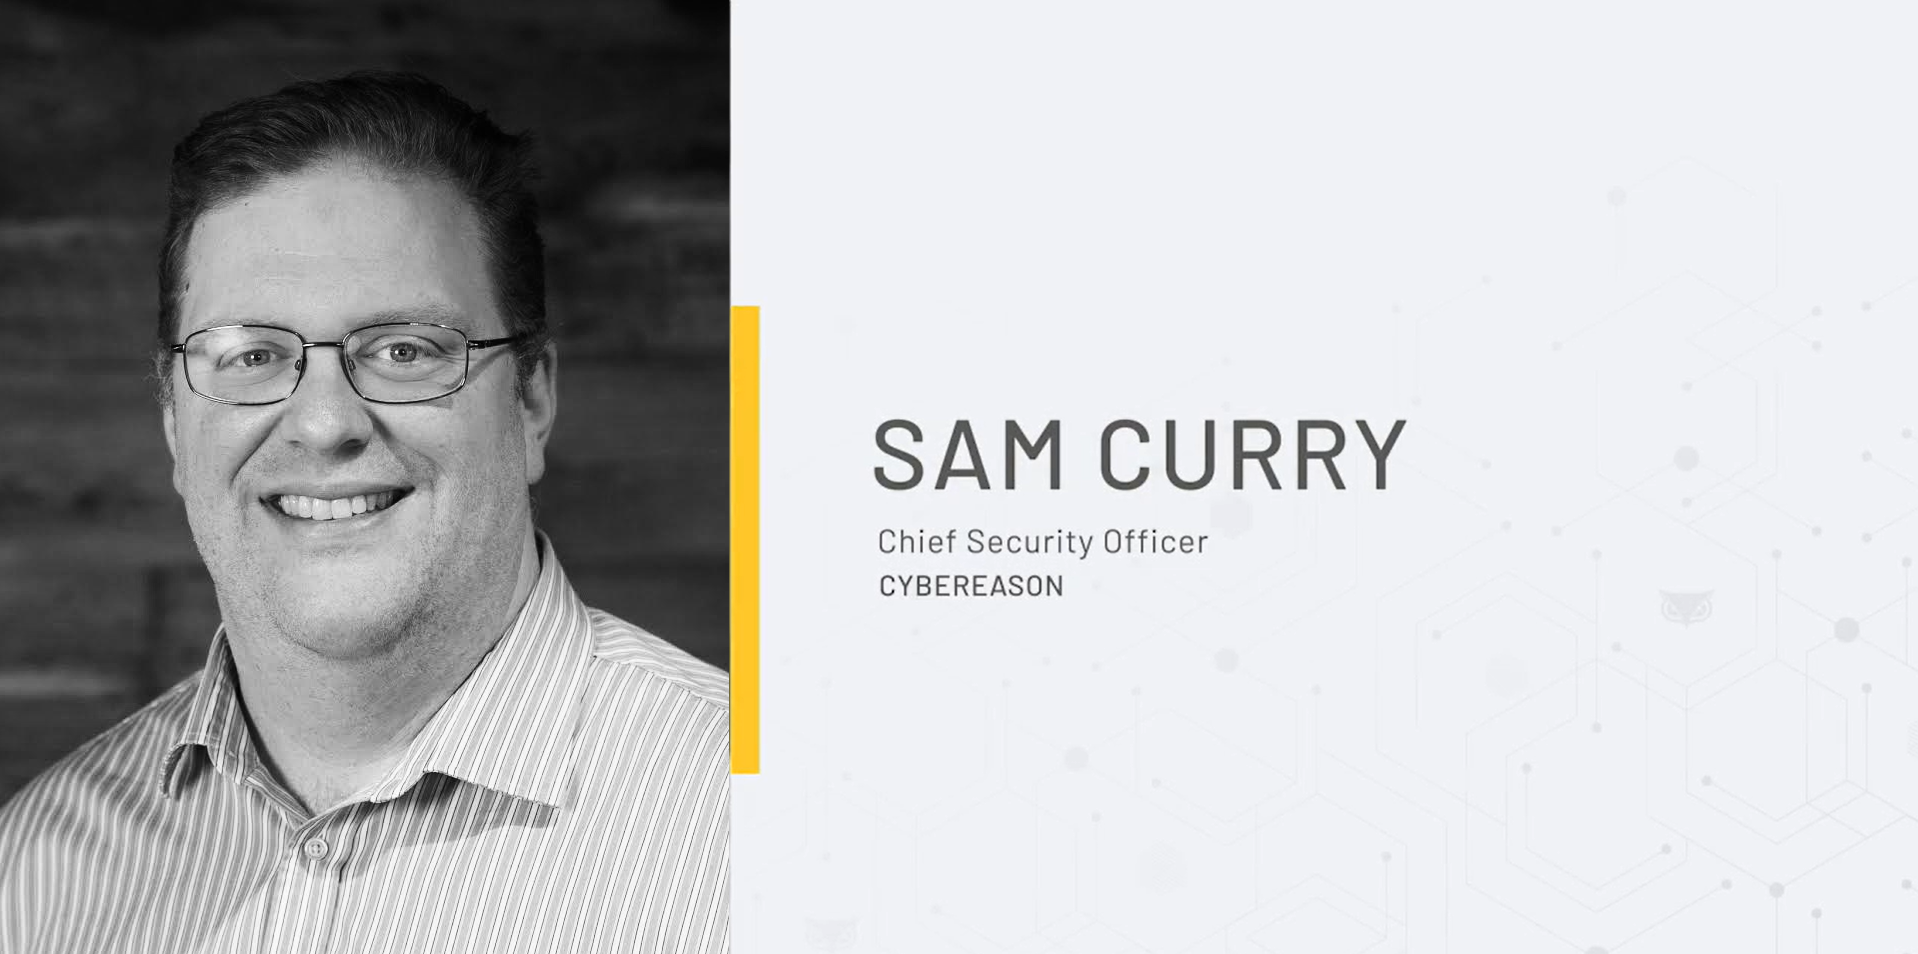 Ever Evolving: Cybereason CSO Sam Curry on Security and Leadership